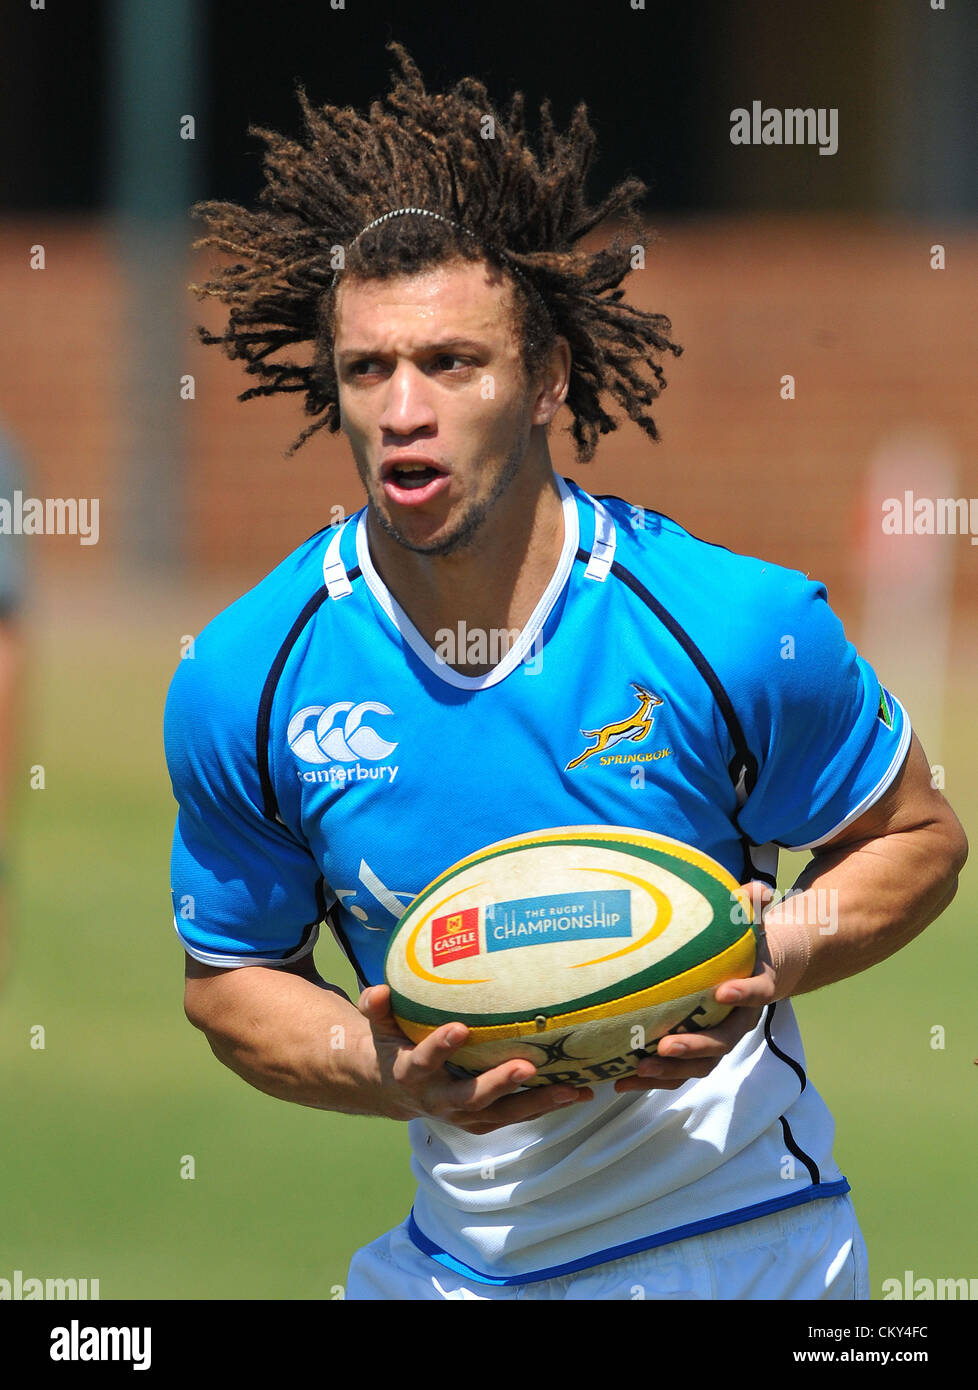 JOHANNESBURG, SOUTH AFRICA - SEPTEMBER 01, Zane Kirchner with ball in hand during the South African national rugby team field session and media conference at KES on September 01, 2012 in Johannesburg, South Africa Photo by Duif du Toit / Gallo Images Stock Photo